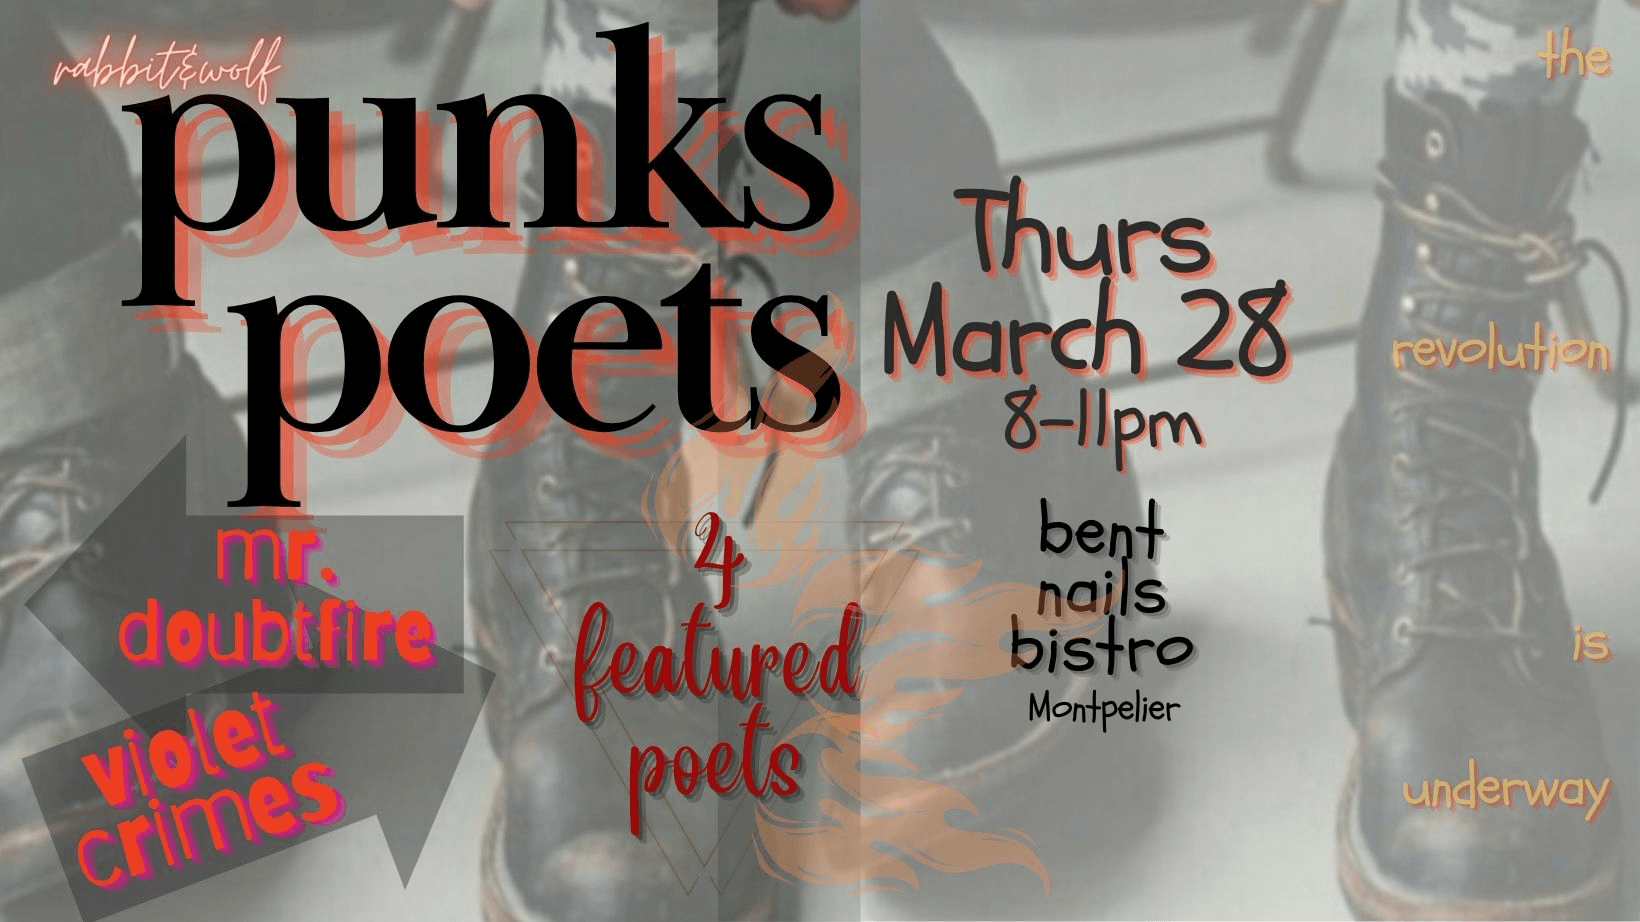 Punks and Poets event poster